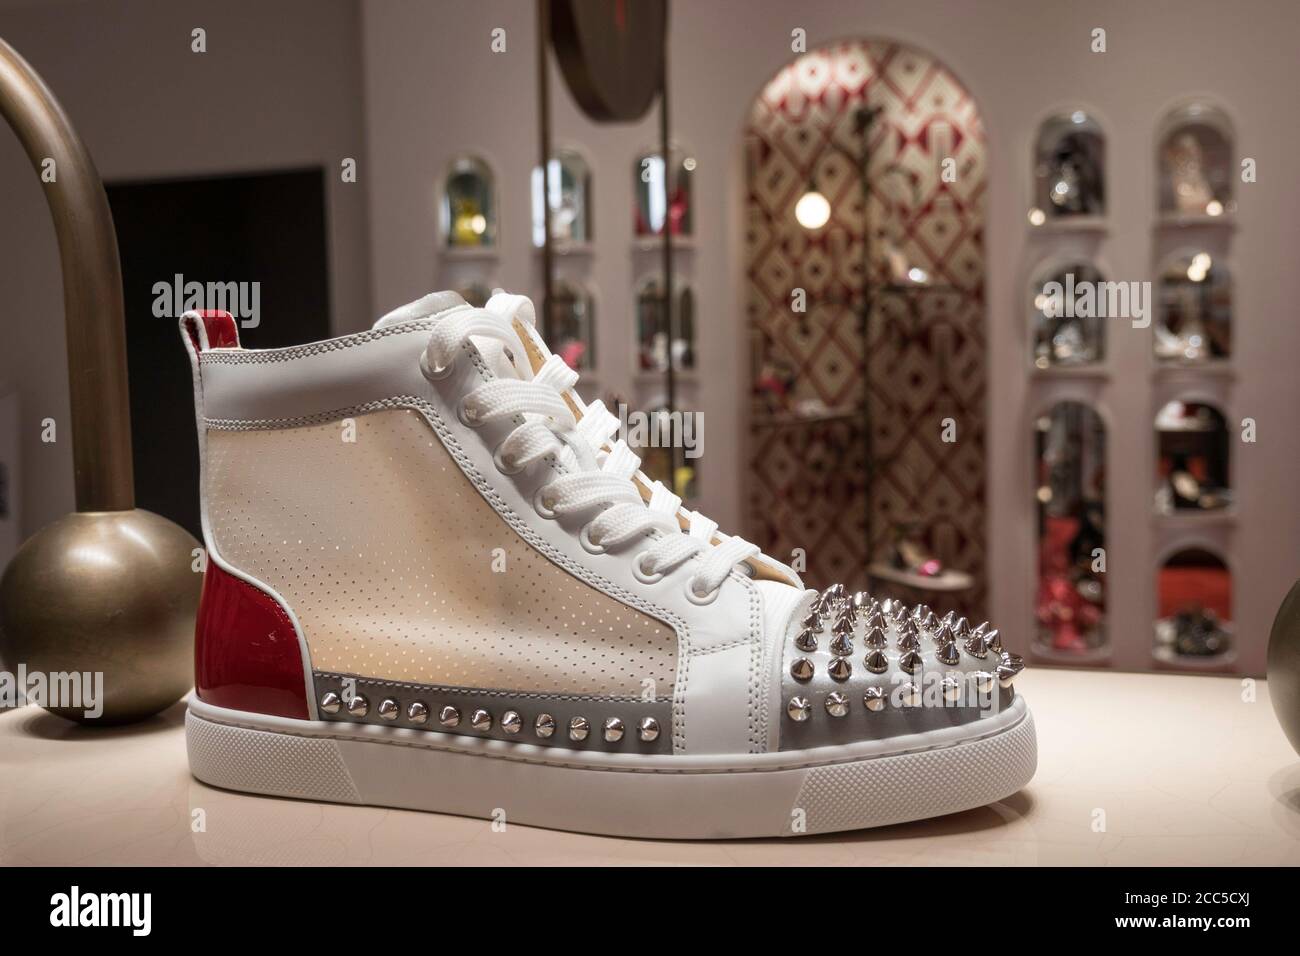 Christian Louboutin Designer Shoes at the Saks Fifth Avenue Flagship ...